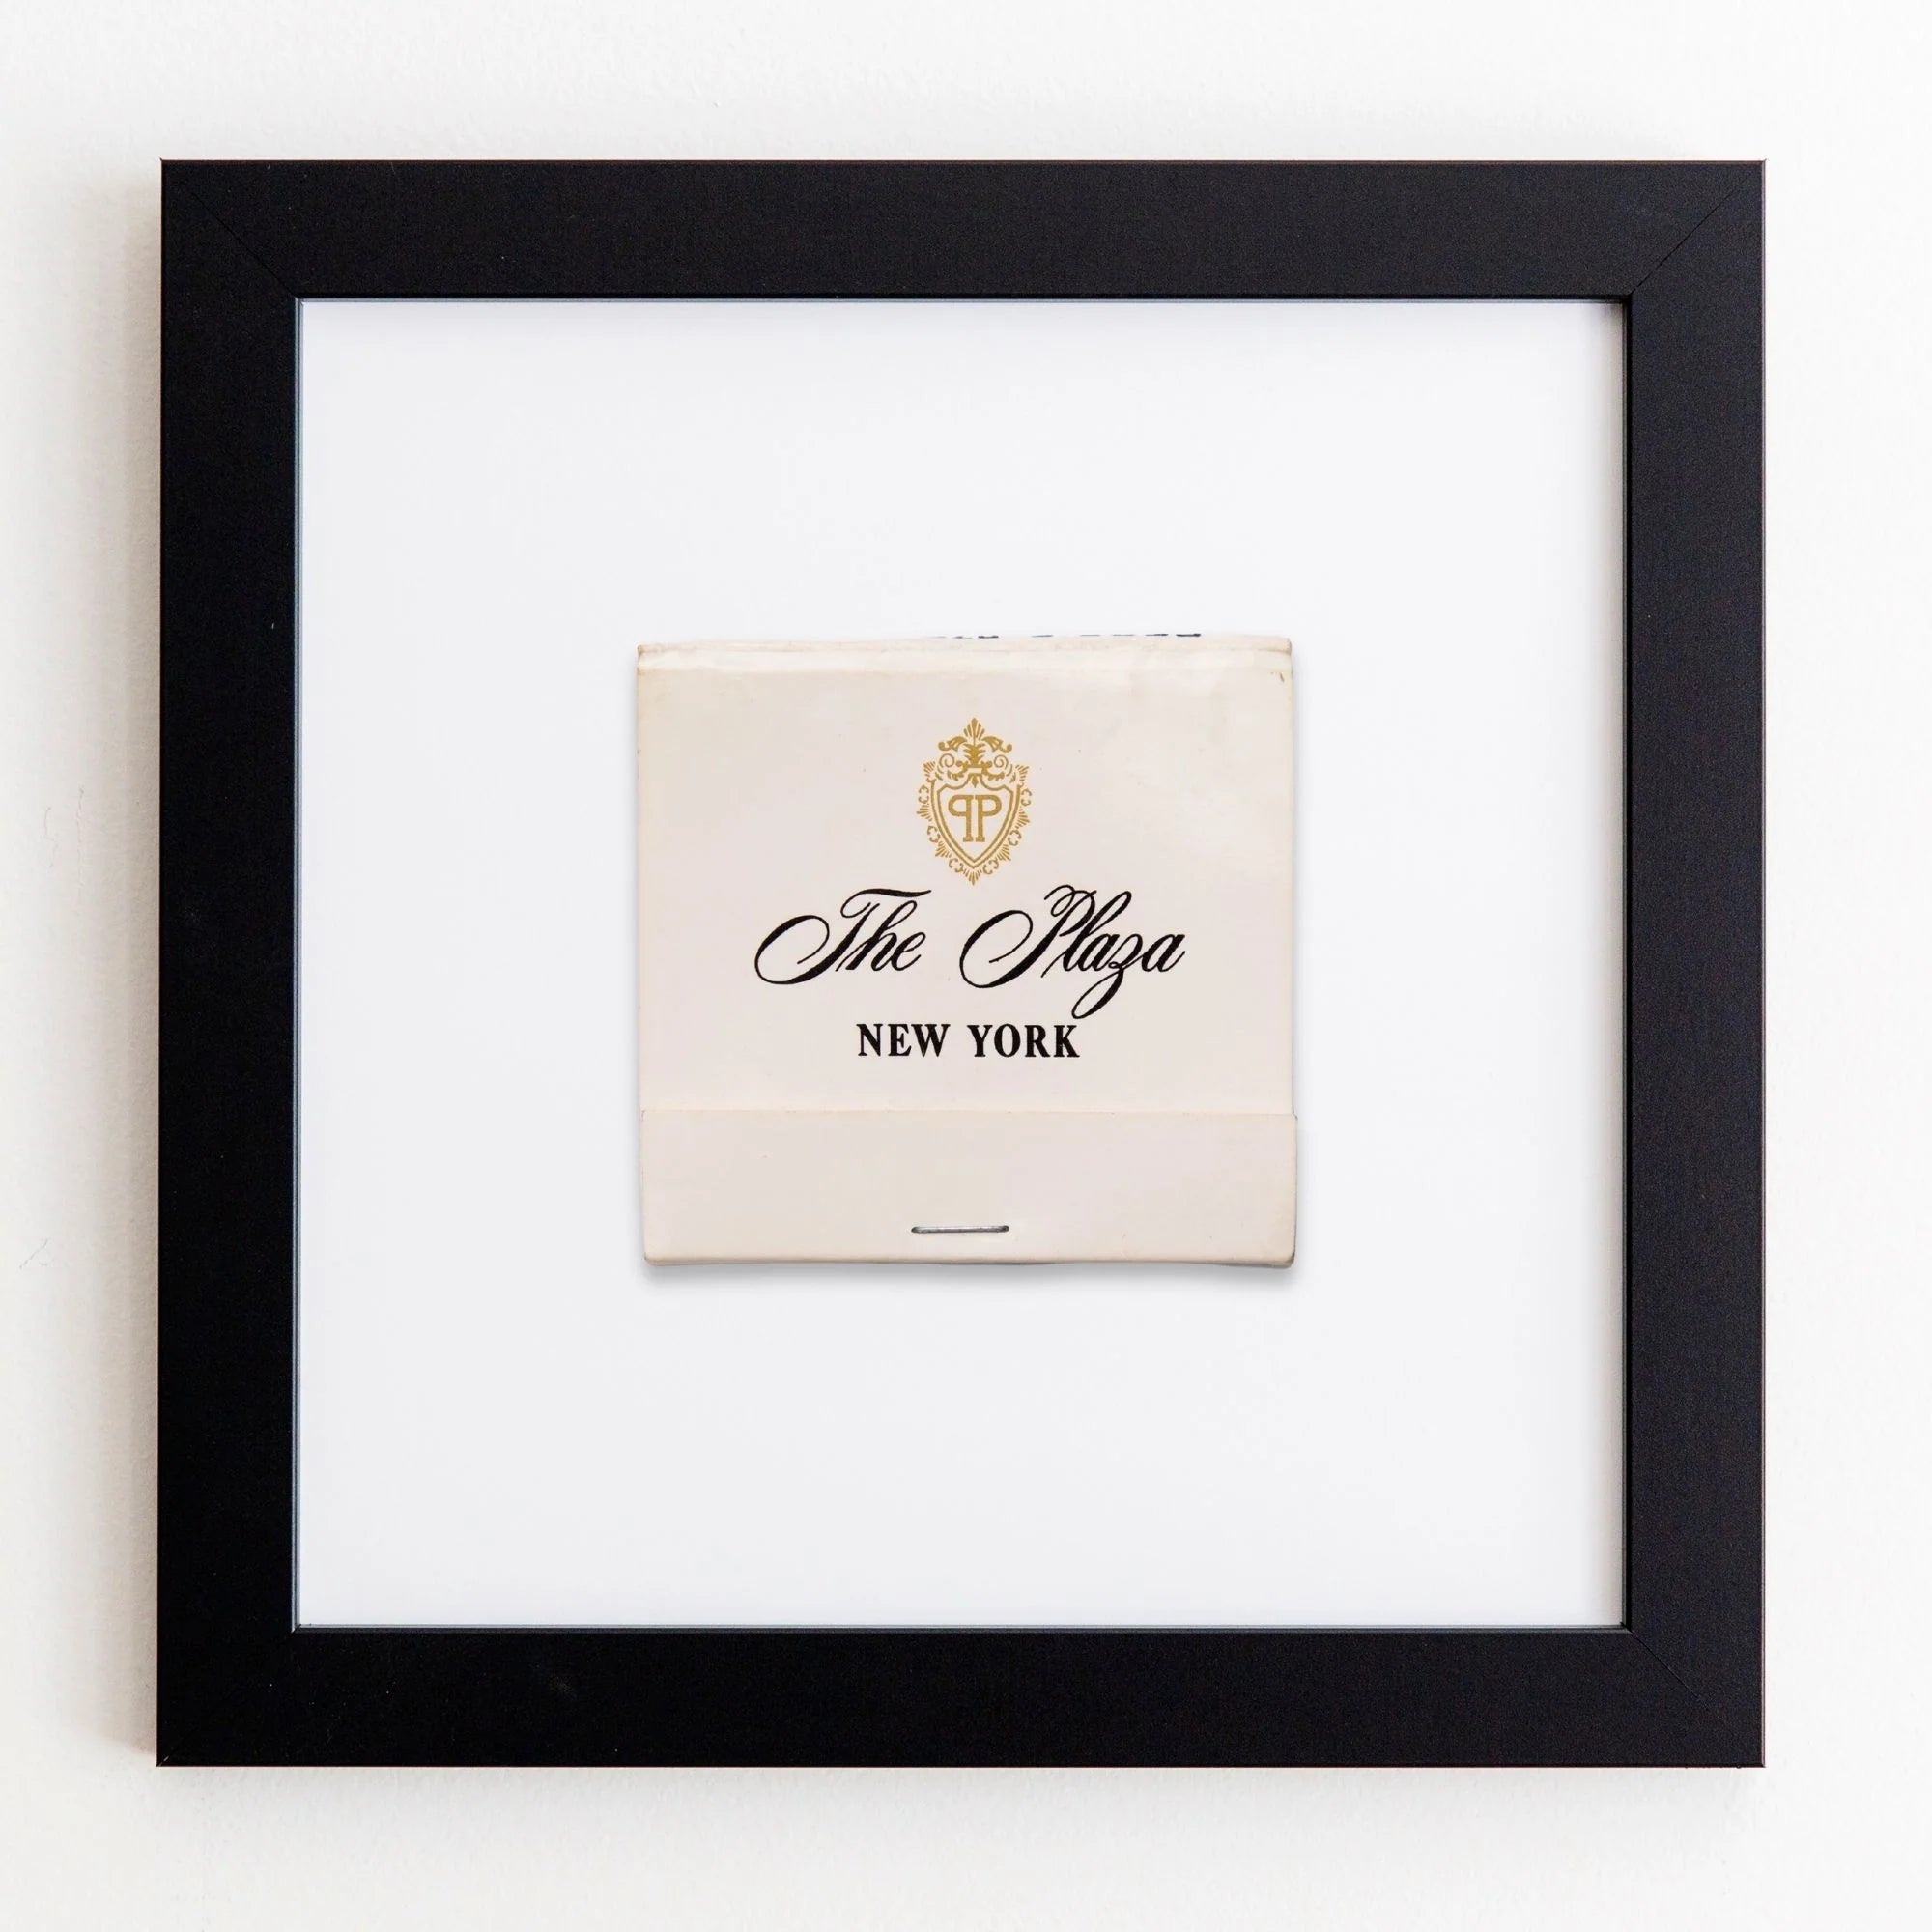 A framed matchbook from The Plaza Hotel, New York, displayed against a white wall. The matchbook, in off-white color, features the hotel’s logo and name in elegant typography within an Art Square Black Frame by Match South.